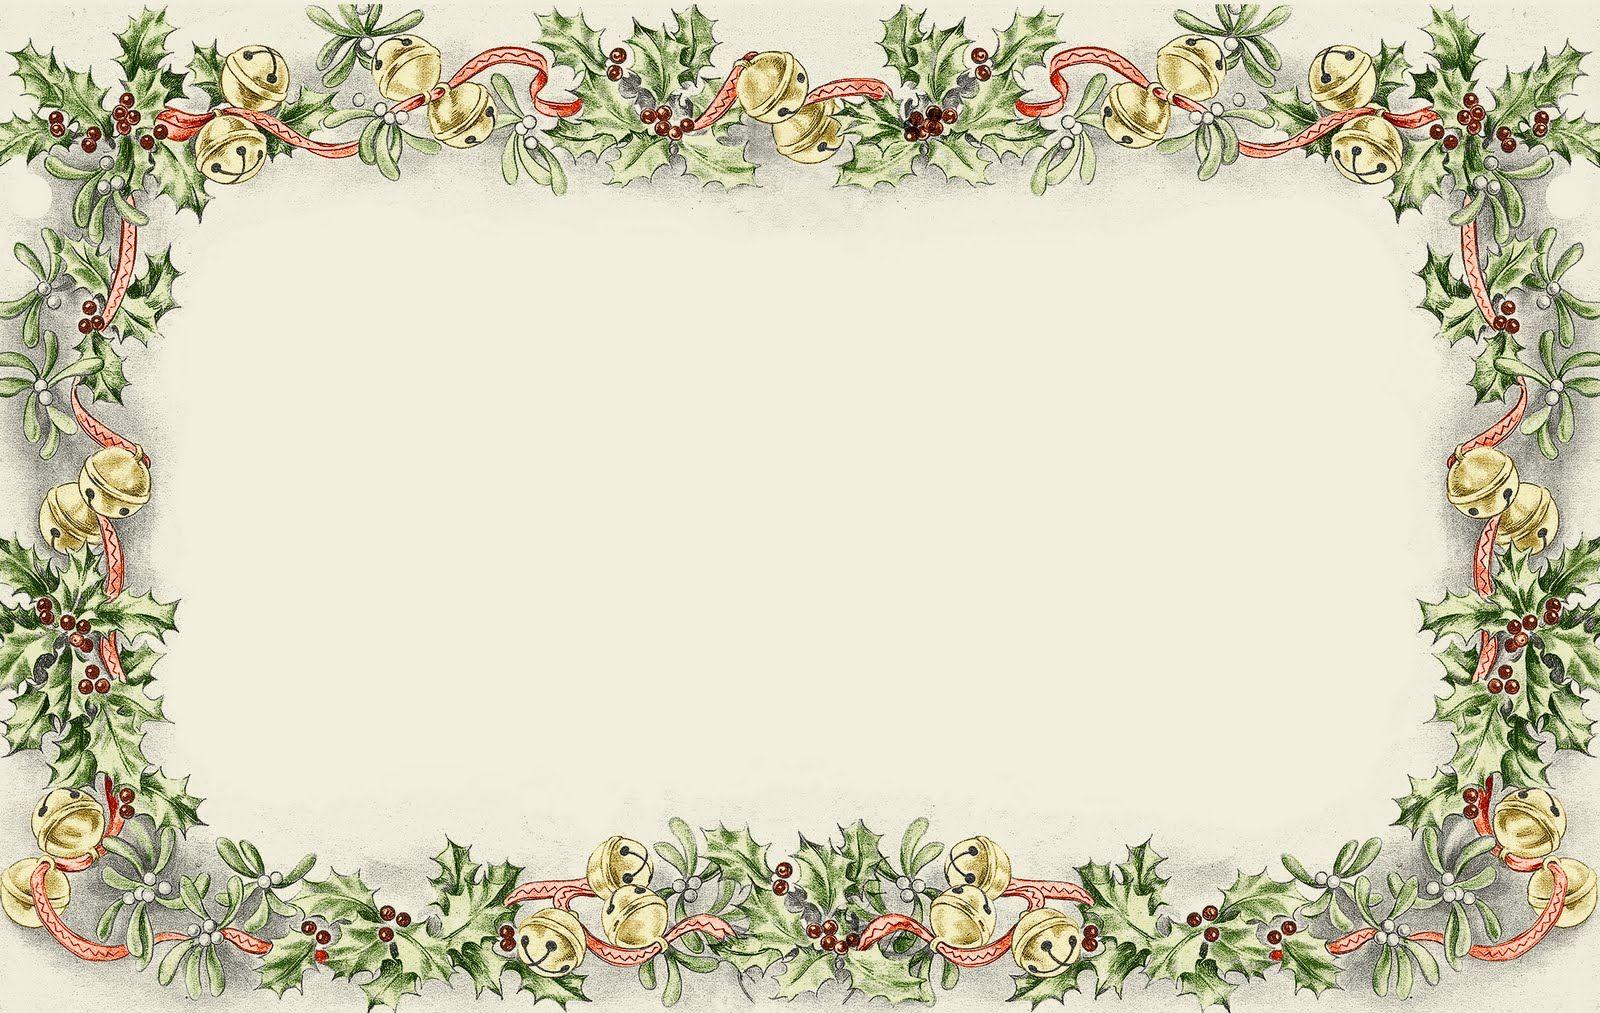 Christmas Wallpaper and Image and Photo: christmas border wallpaper, christmas border wallpaper, c. Christmas border, Christmas note cards, Christmas background